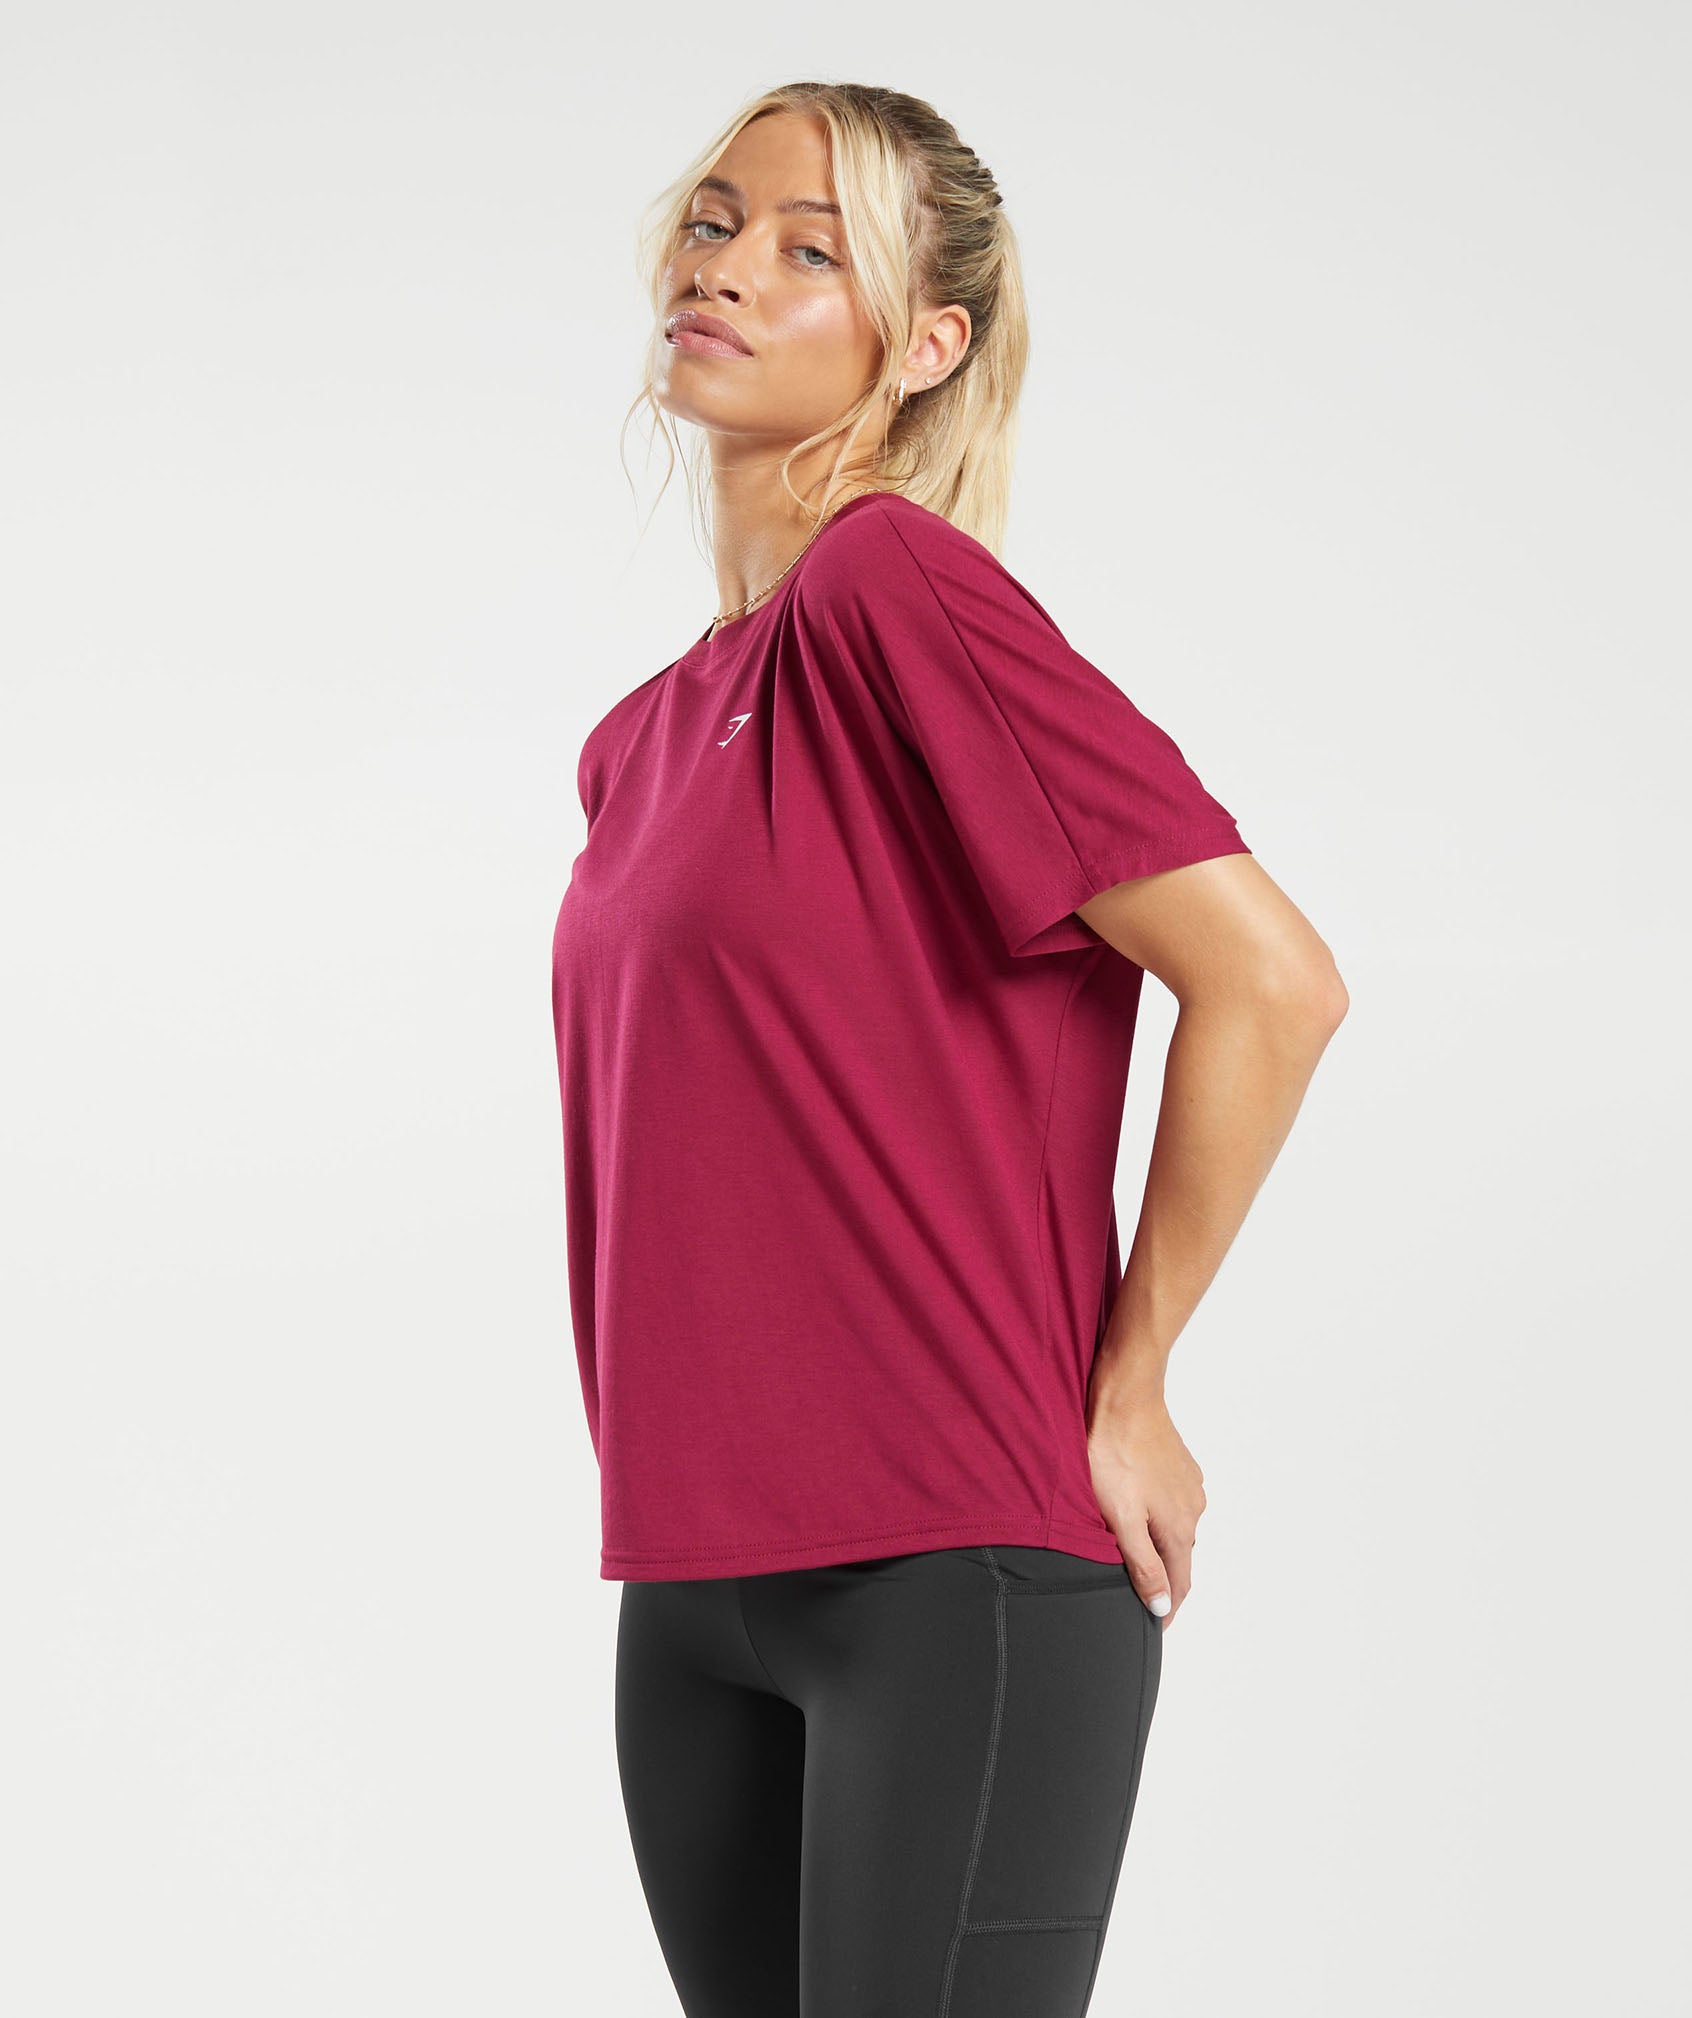 Super Soft T-Shirt in Raspberry Pink - view 3